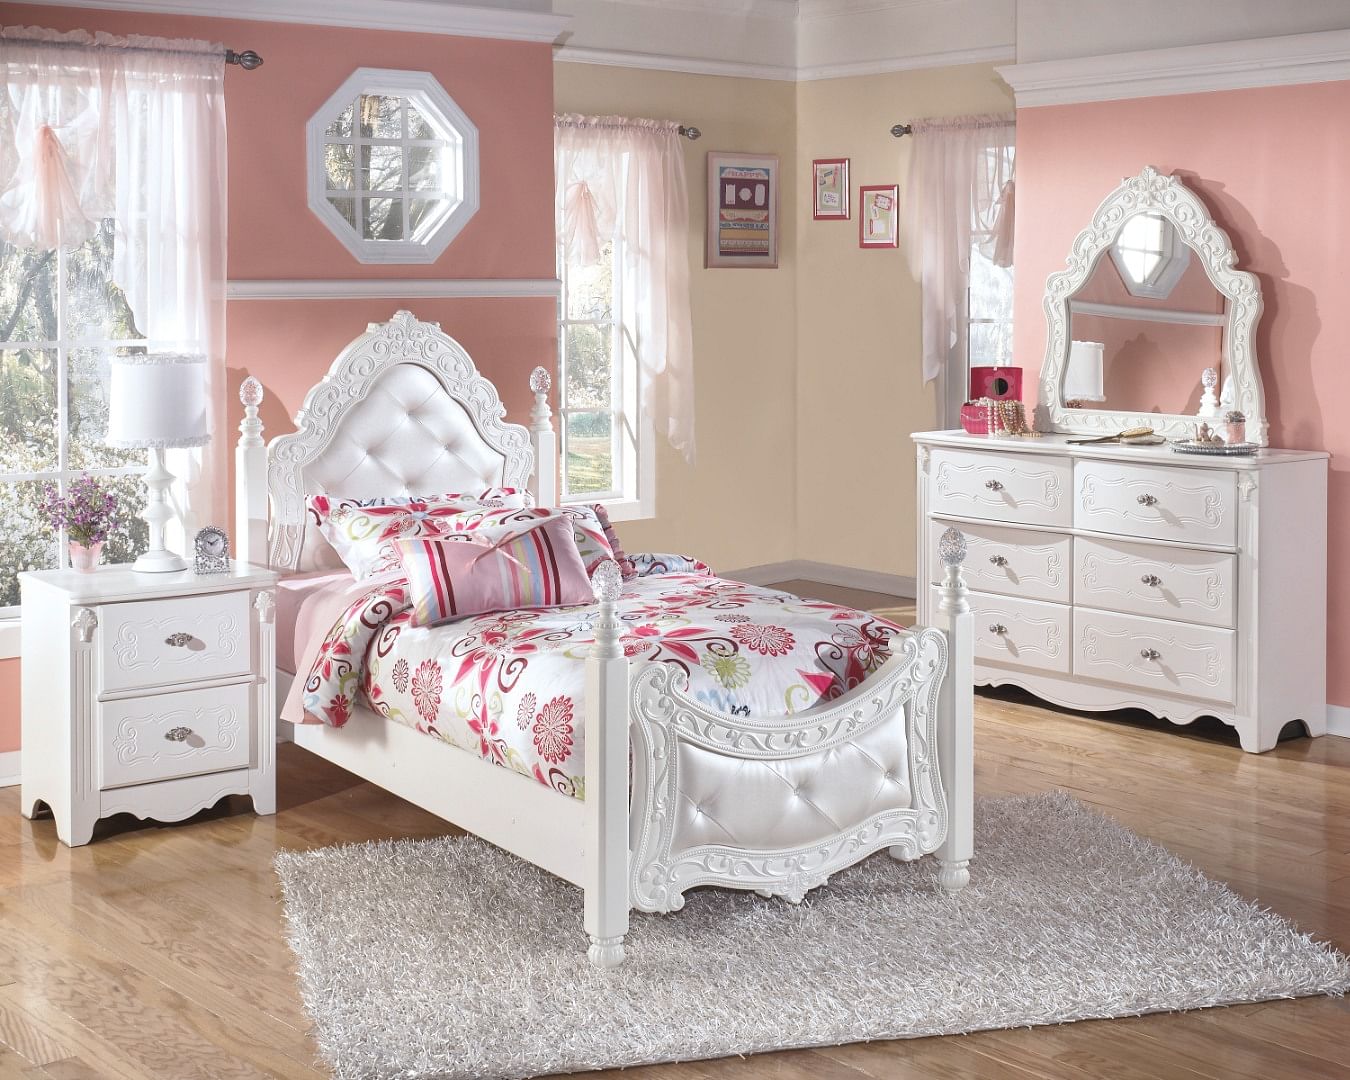 Ashley Furniture - Exquisite Twin Poster Bedroom S...